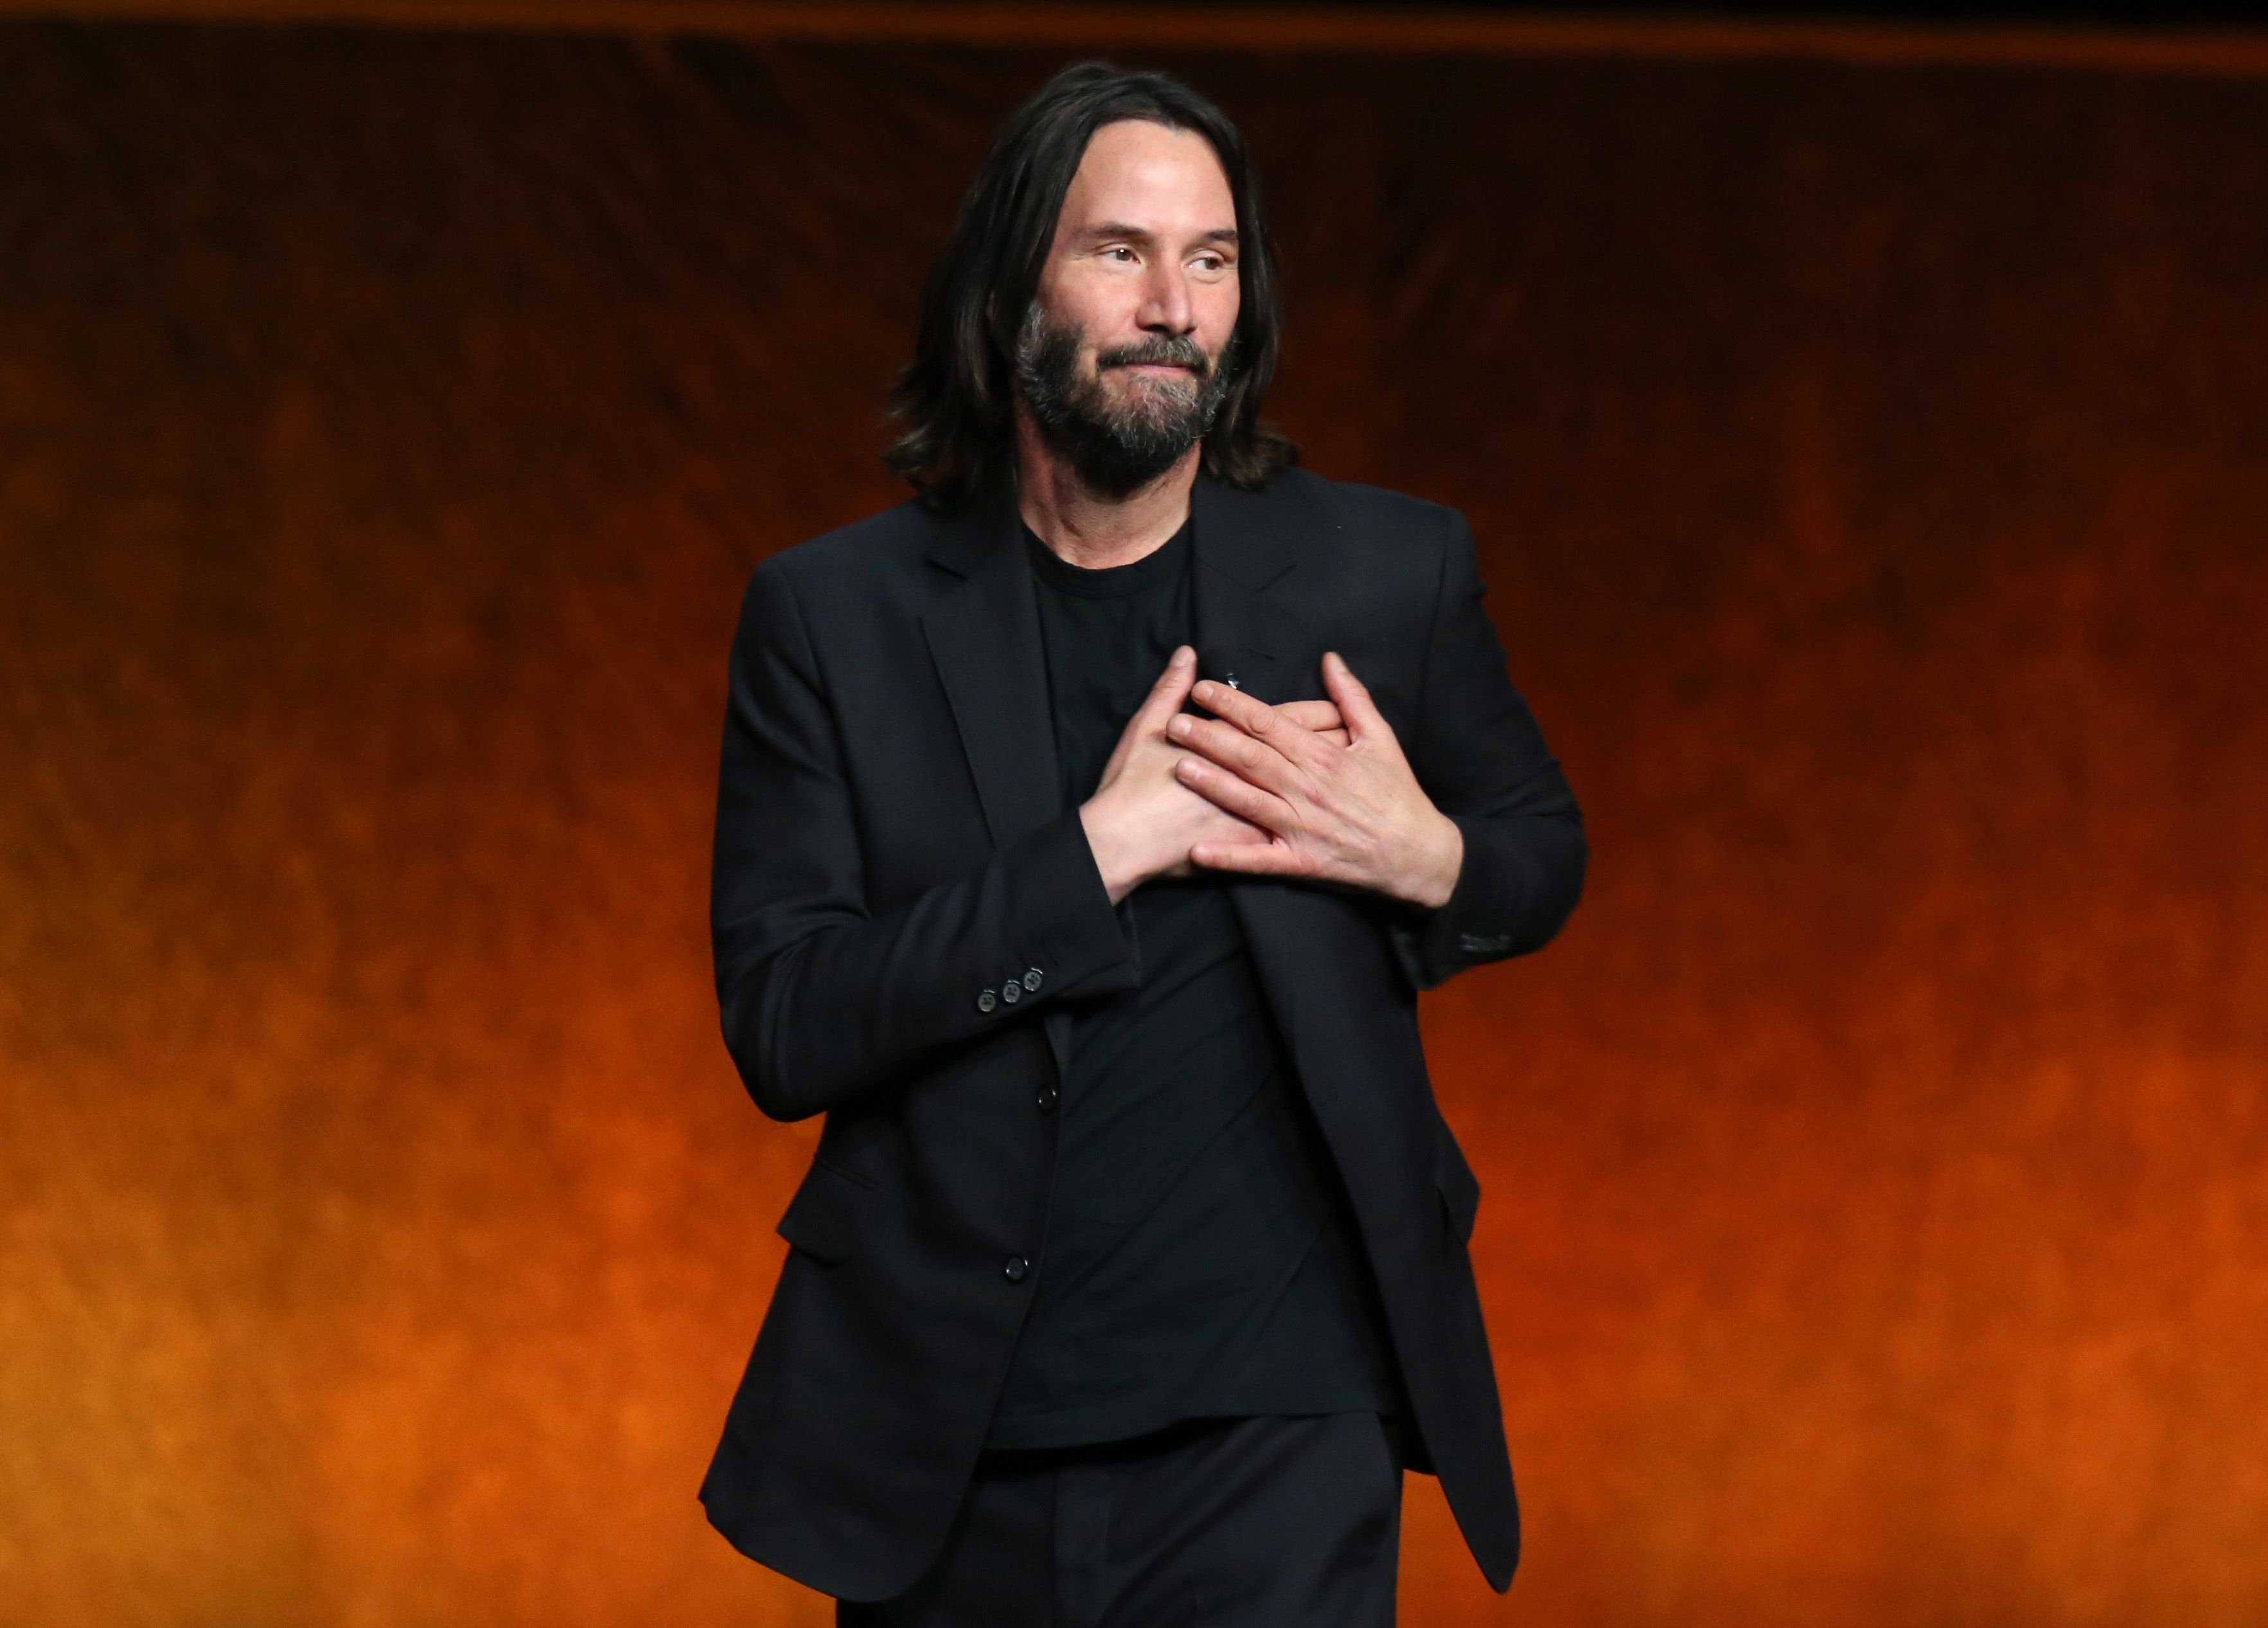 Keanu Reeves during Lionsgate exclusive presentation at Caesars Palace during CinemaCon 2022, on April 28, 2022, in Las Vegas, Nevada. | Source: Getty Images